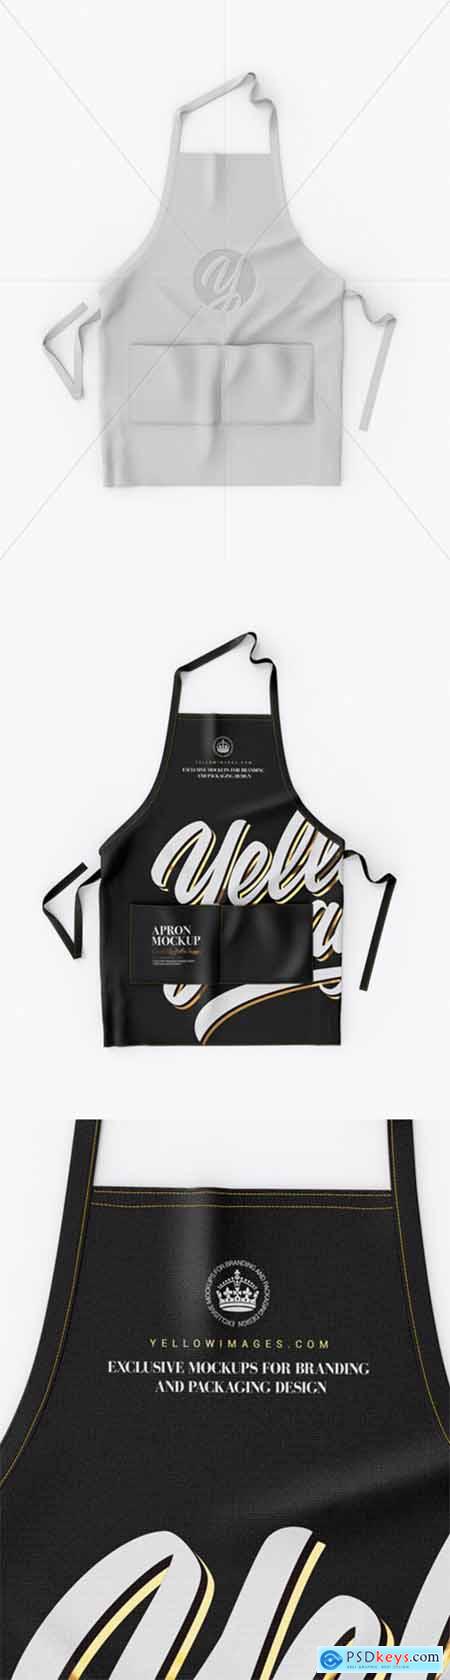 Download Apron Mockup - Top View 23603 » Free Download Photoshop ...